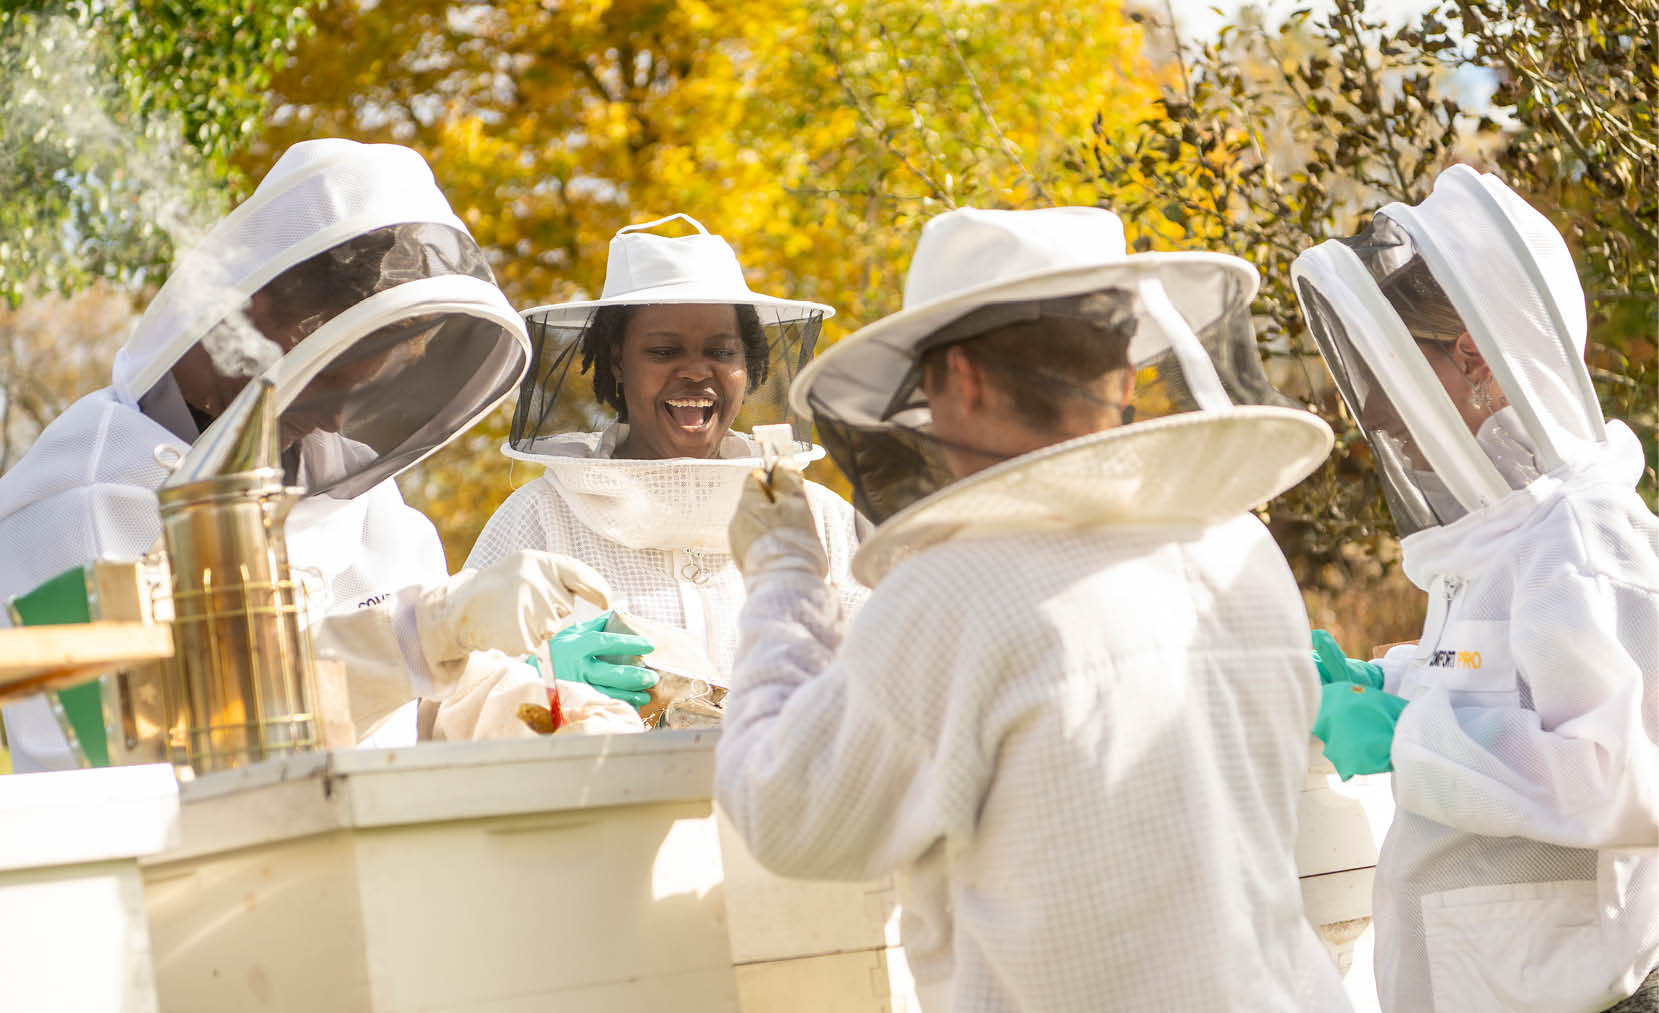 Apiculture at Westminster College